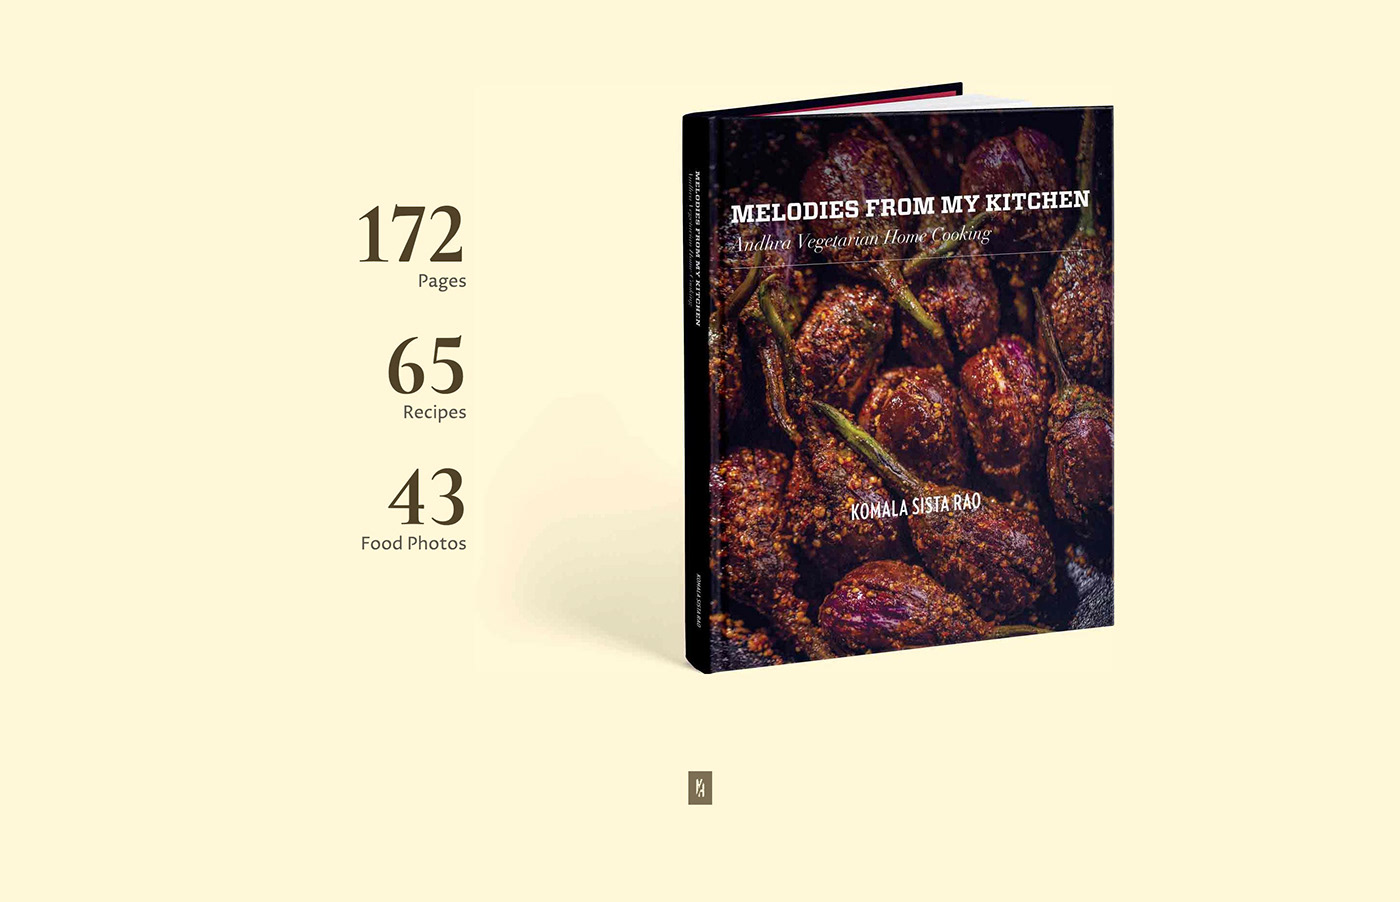 Cover of the book, along with text 192 pages, 65 recipes, and 43 food photos.